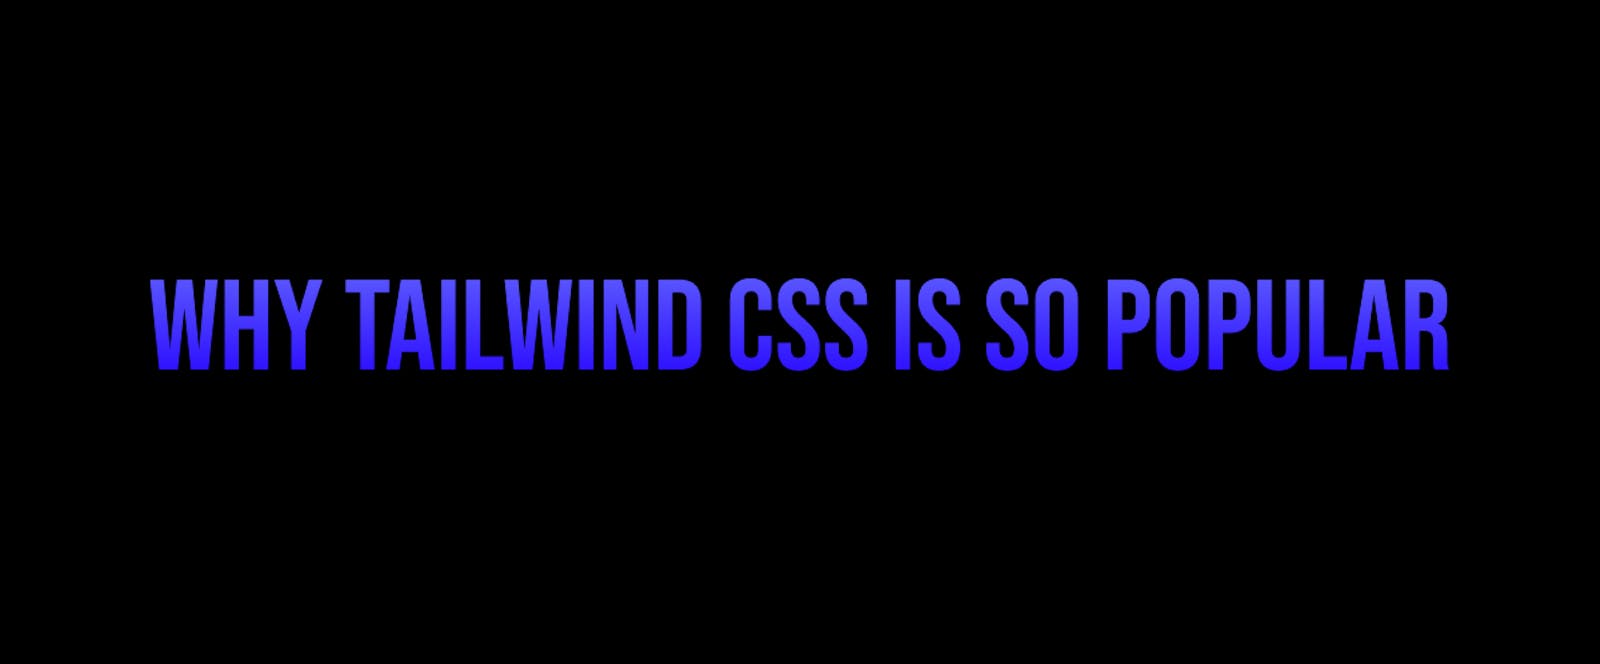 Why Tailwind CSS is Popular in Web Development